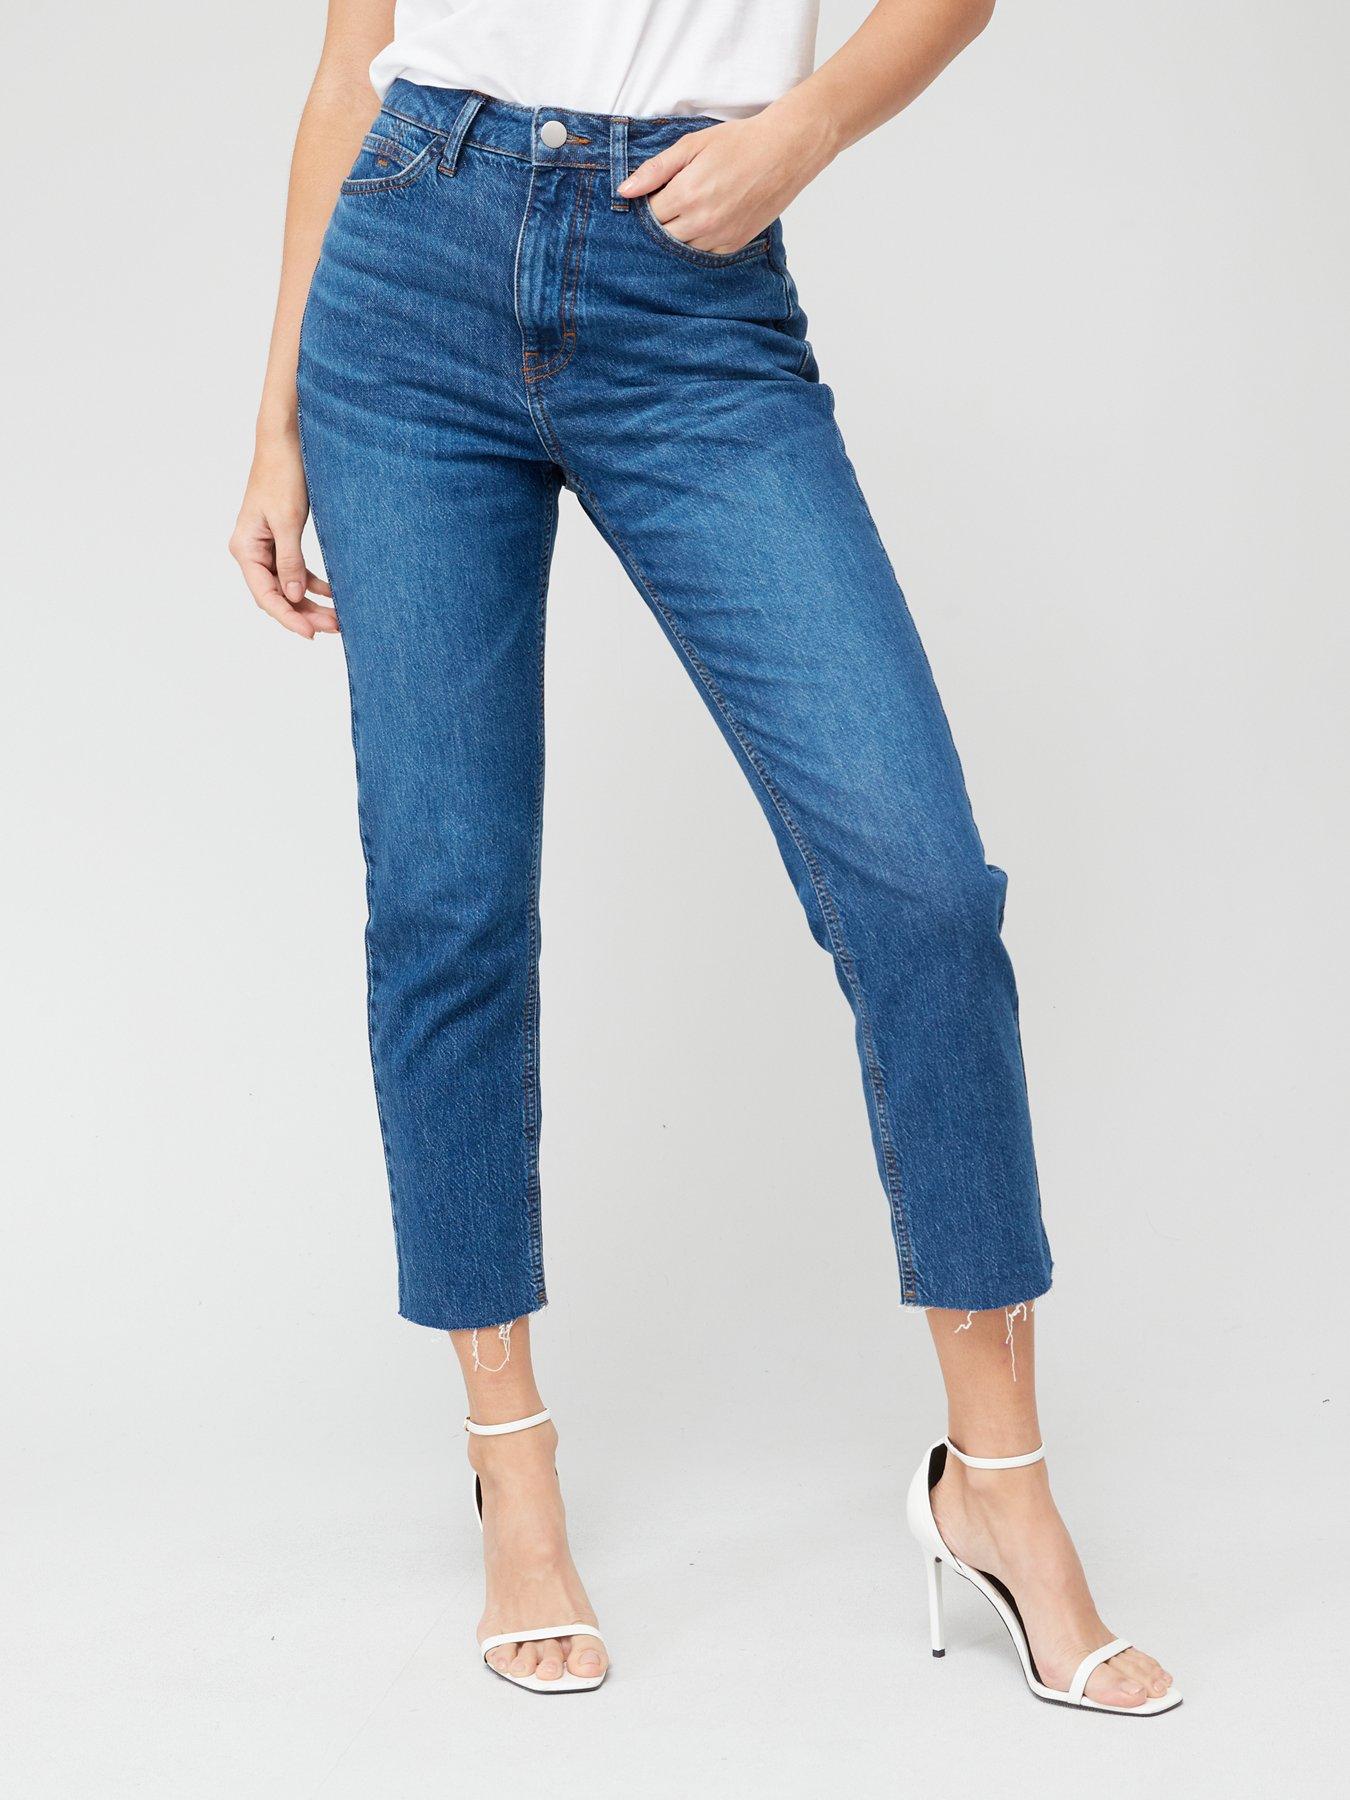 Cropped Jeans, V by very, Jeans, Women